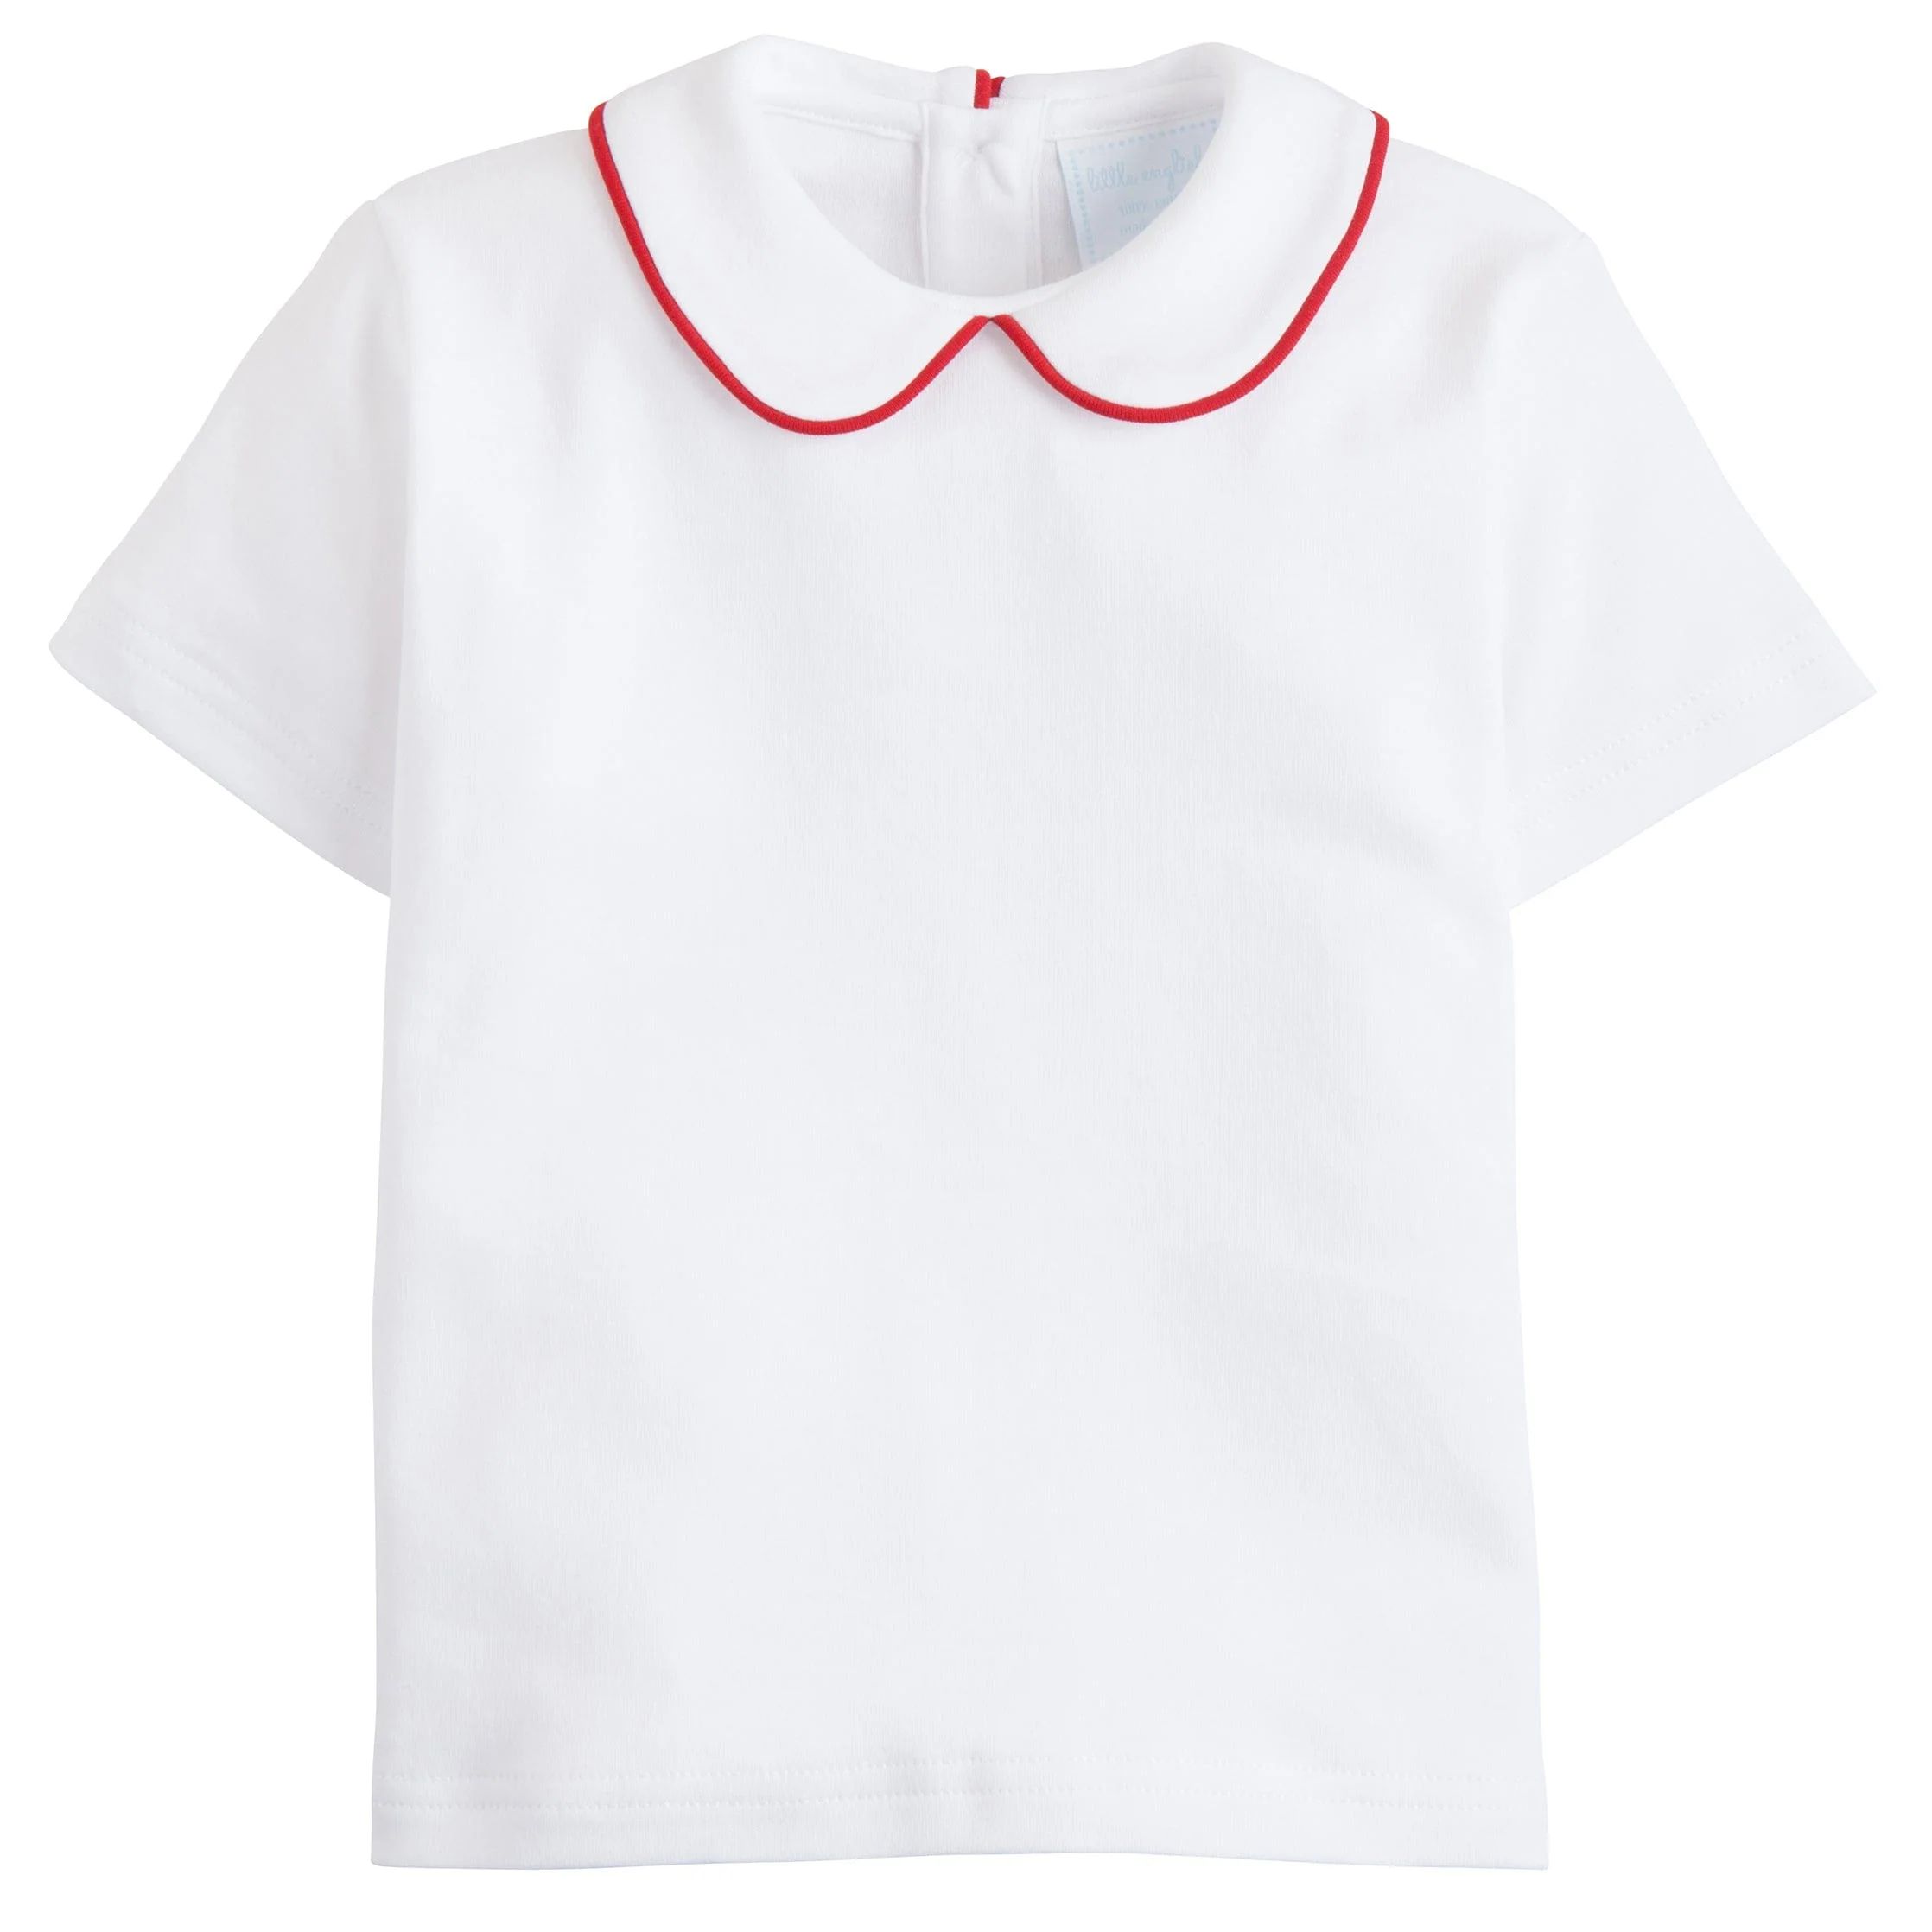 Boys & Girls Red Piped Peter Pan Collared Shirt | Little English